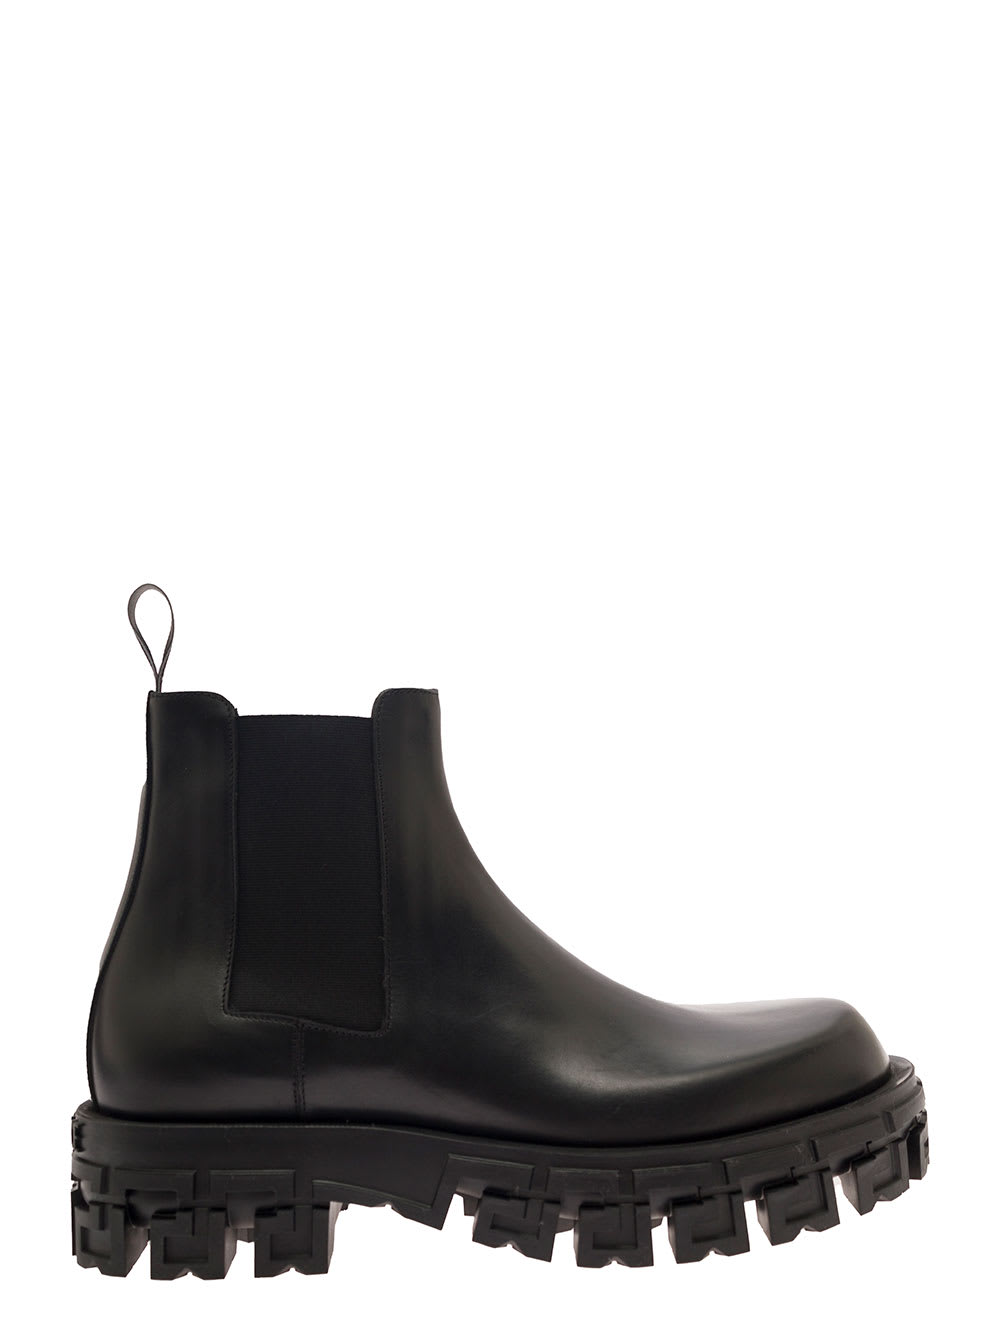 VERSACE BLACK CHELSEA BOOTS WITH GRECA PLATFORM IN SMOOTH LEATHER MAN